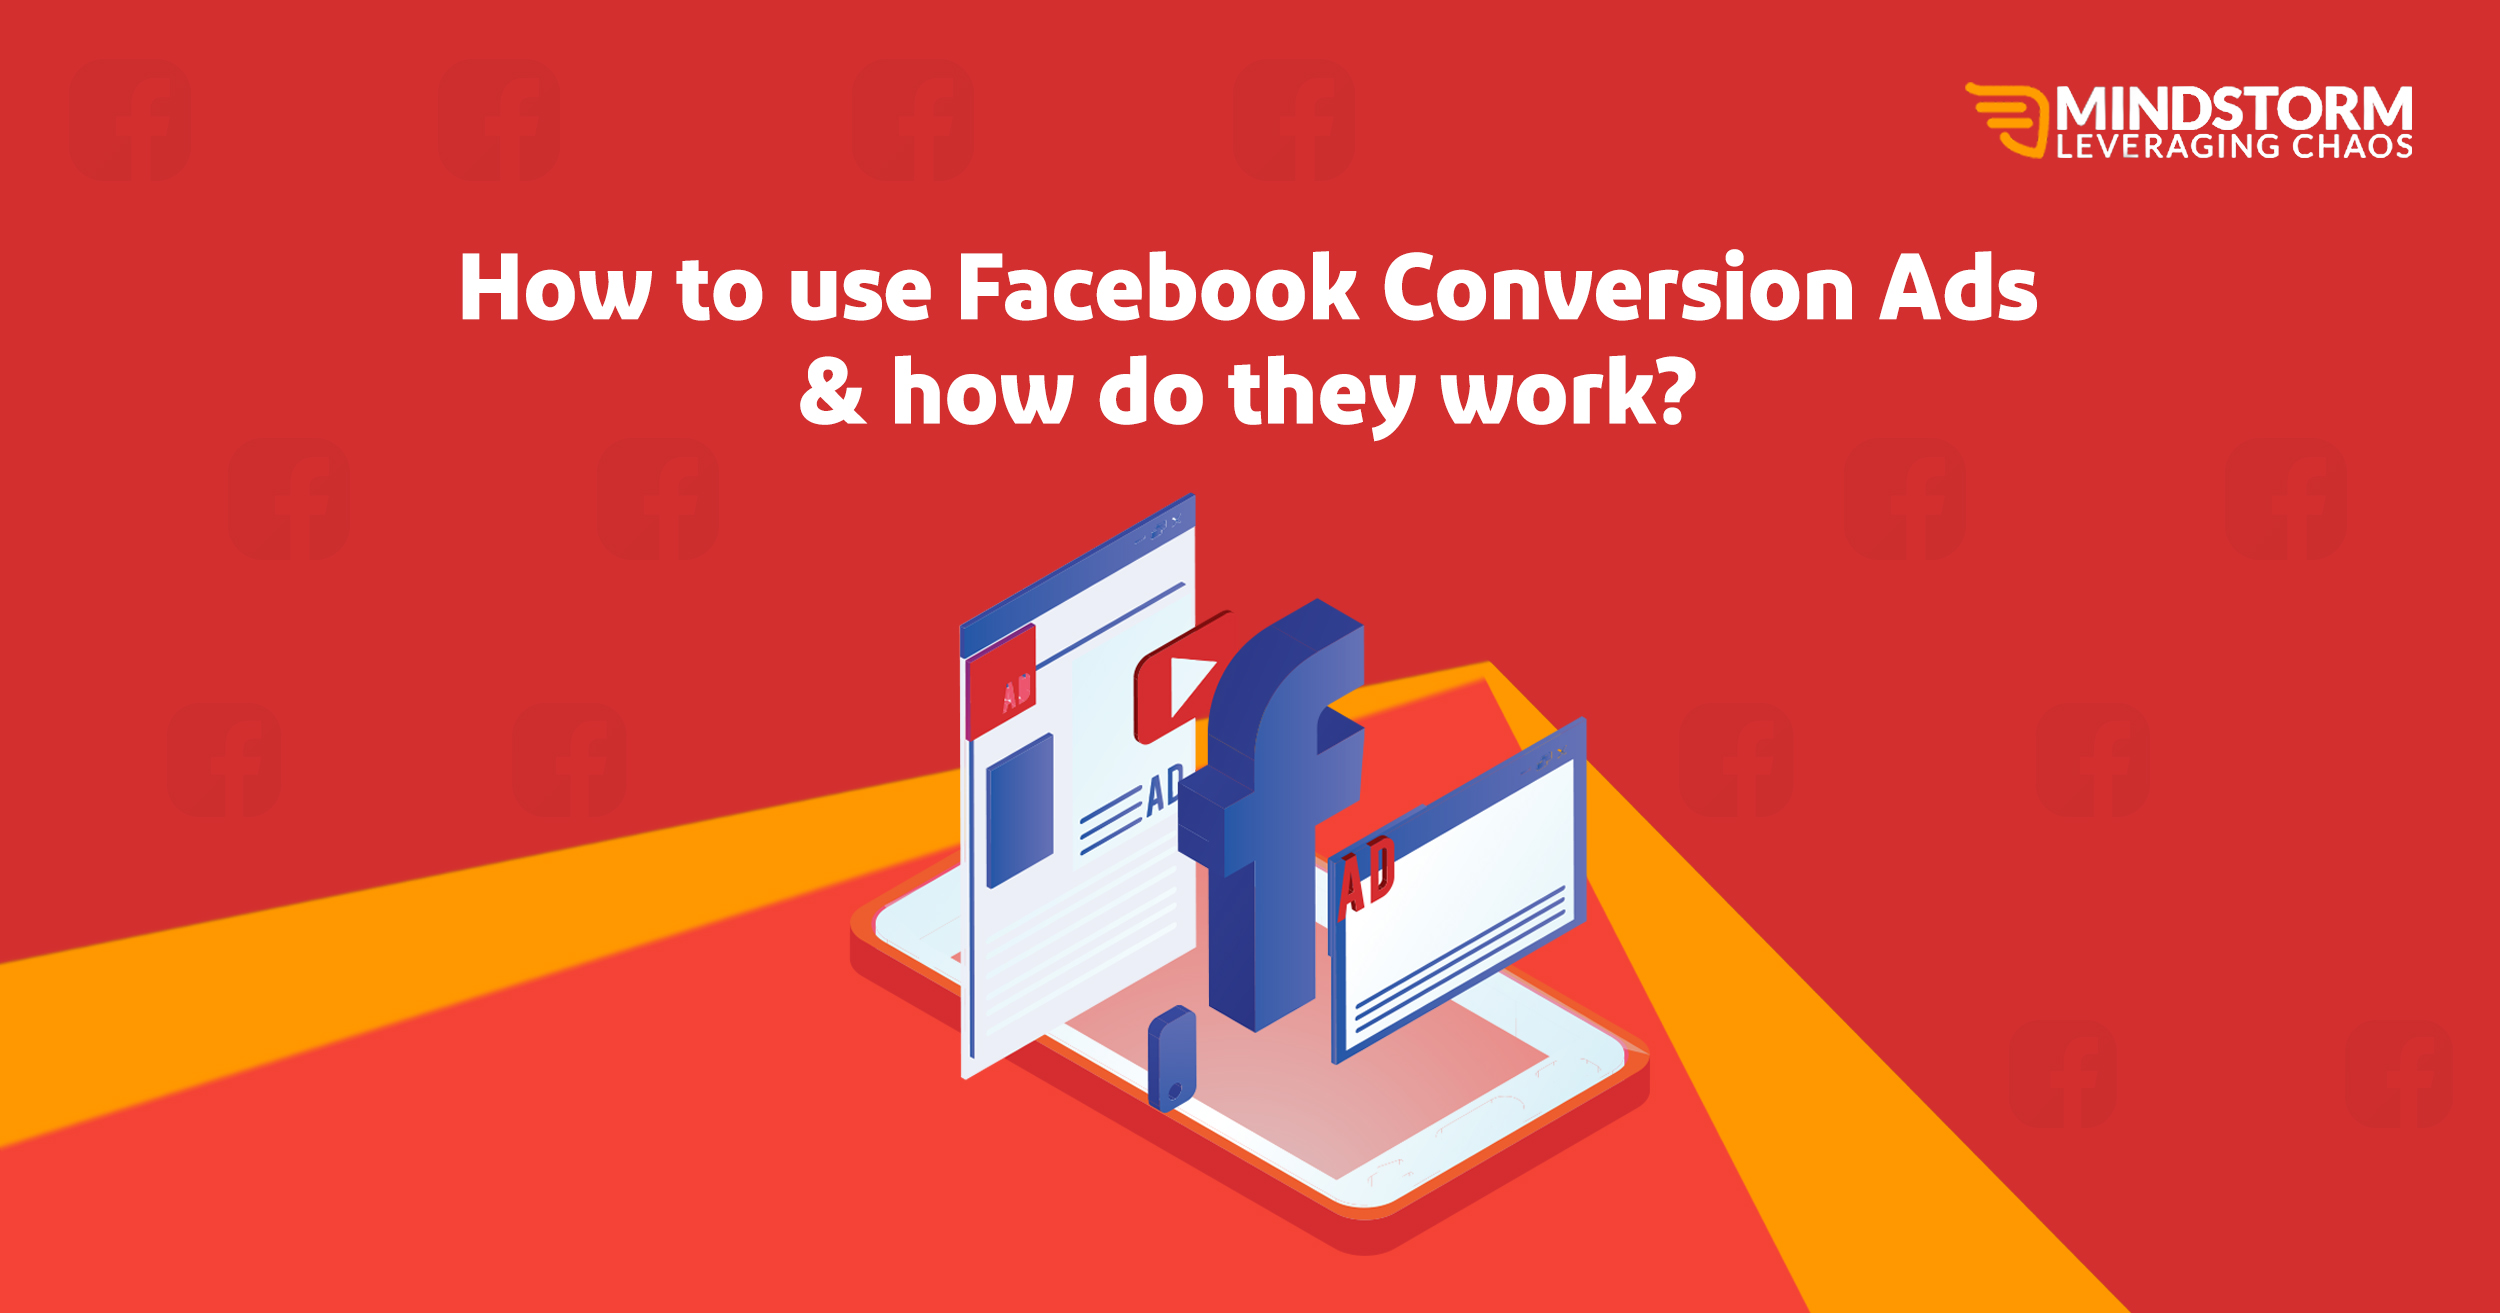 How to use Facebook Conversion Ads? How do they work?